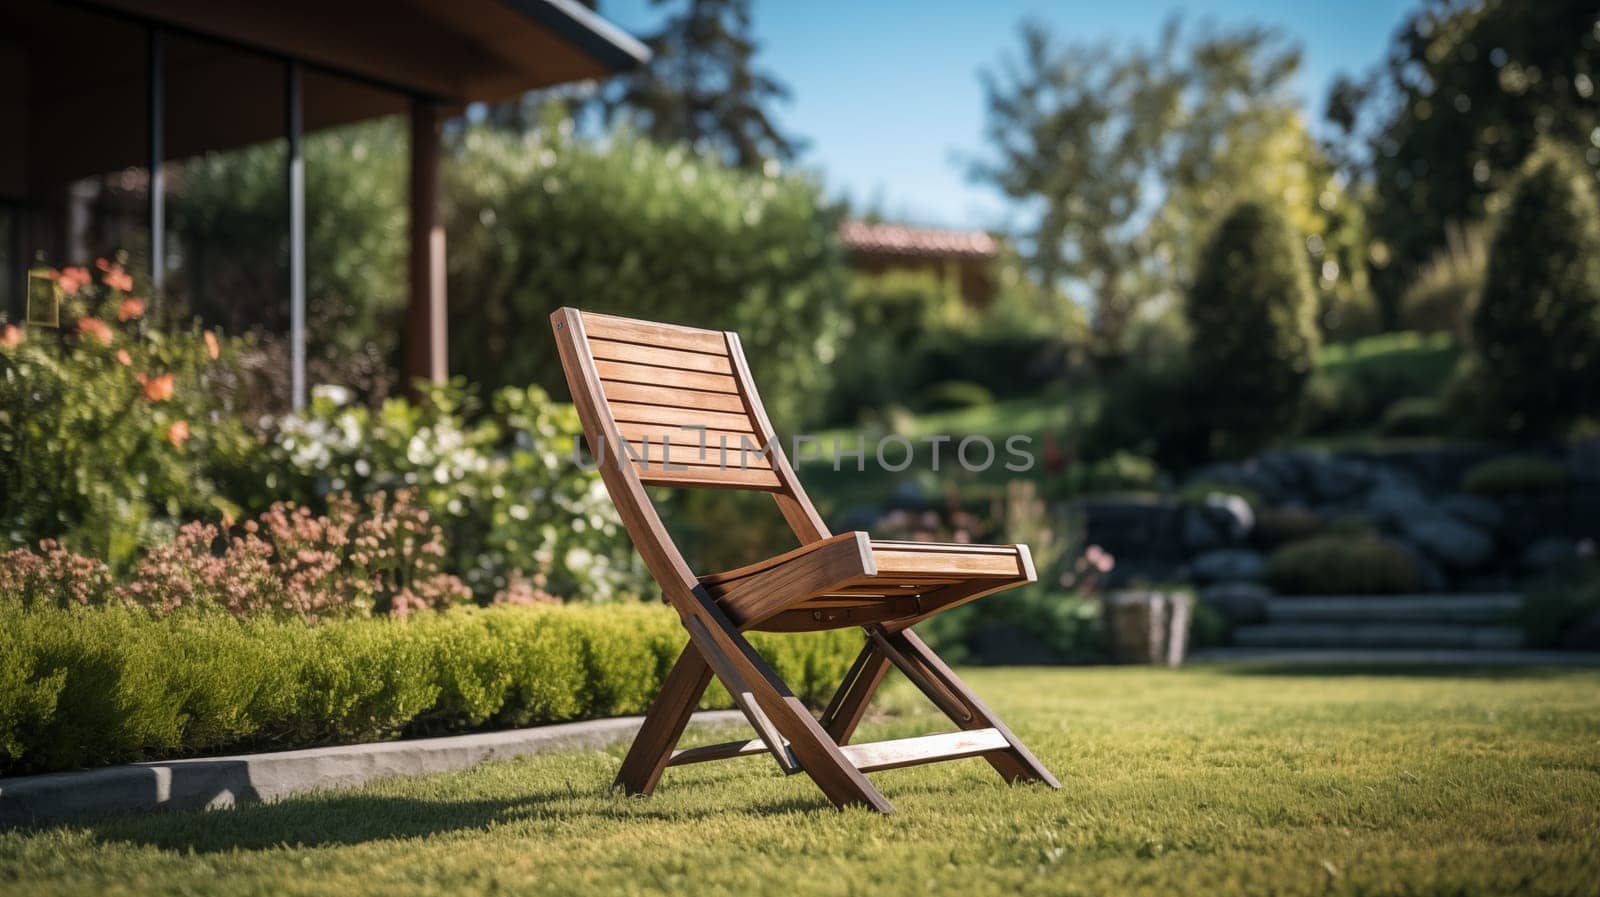 Wooden chair on manicured lawn near flowerbed, stand on green lawn